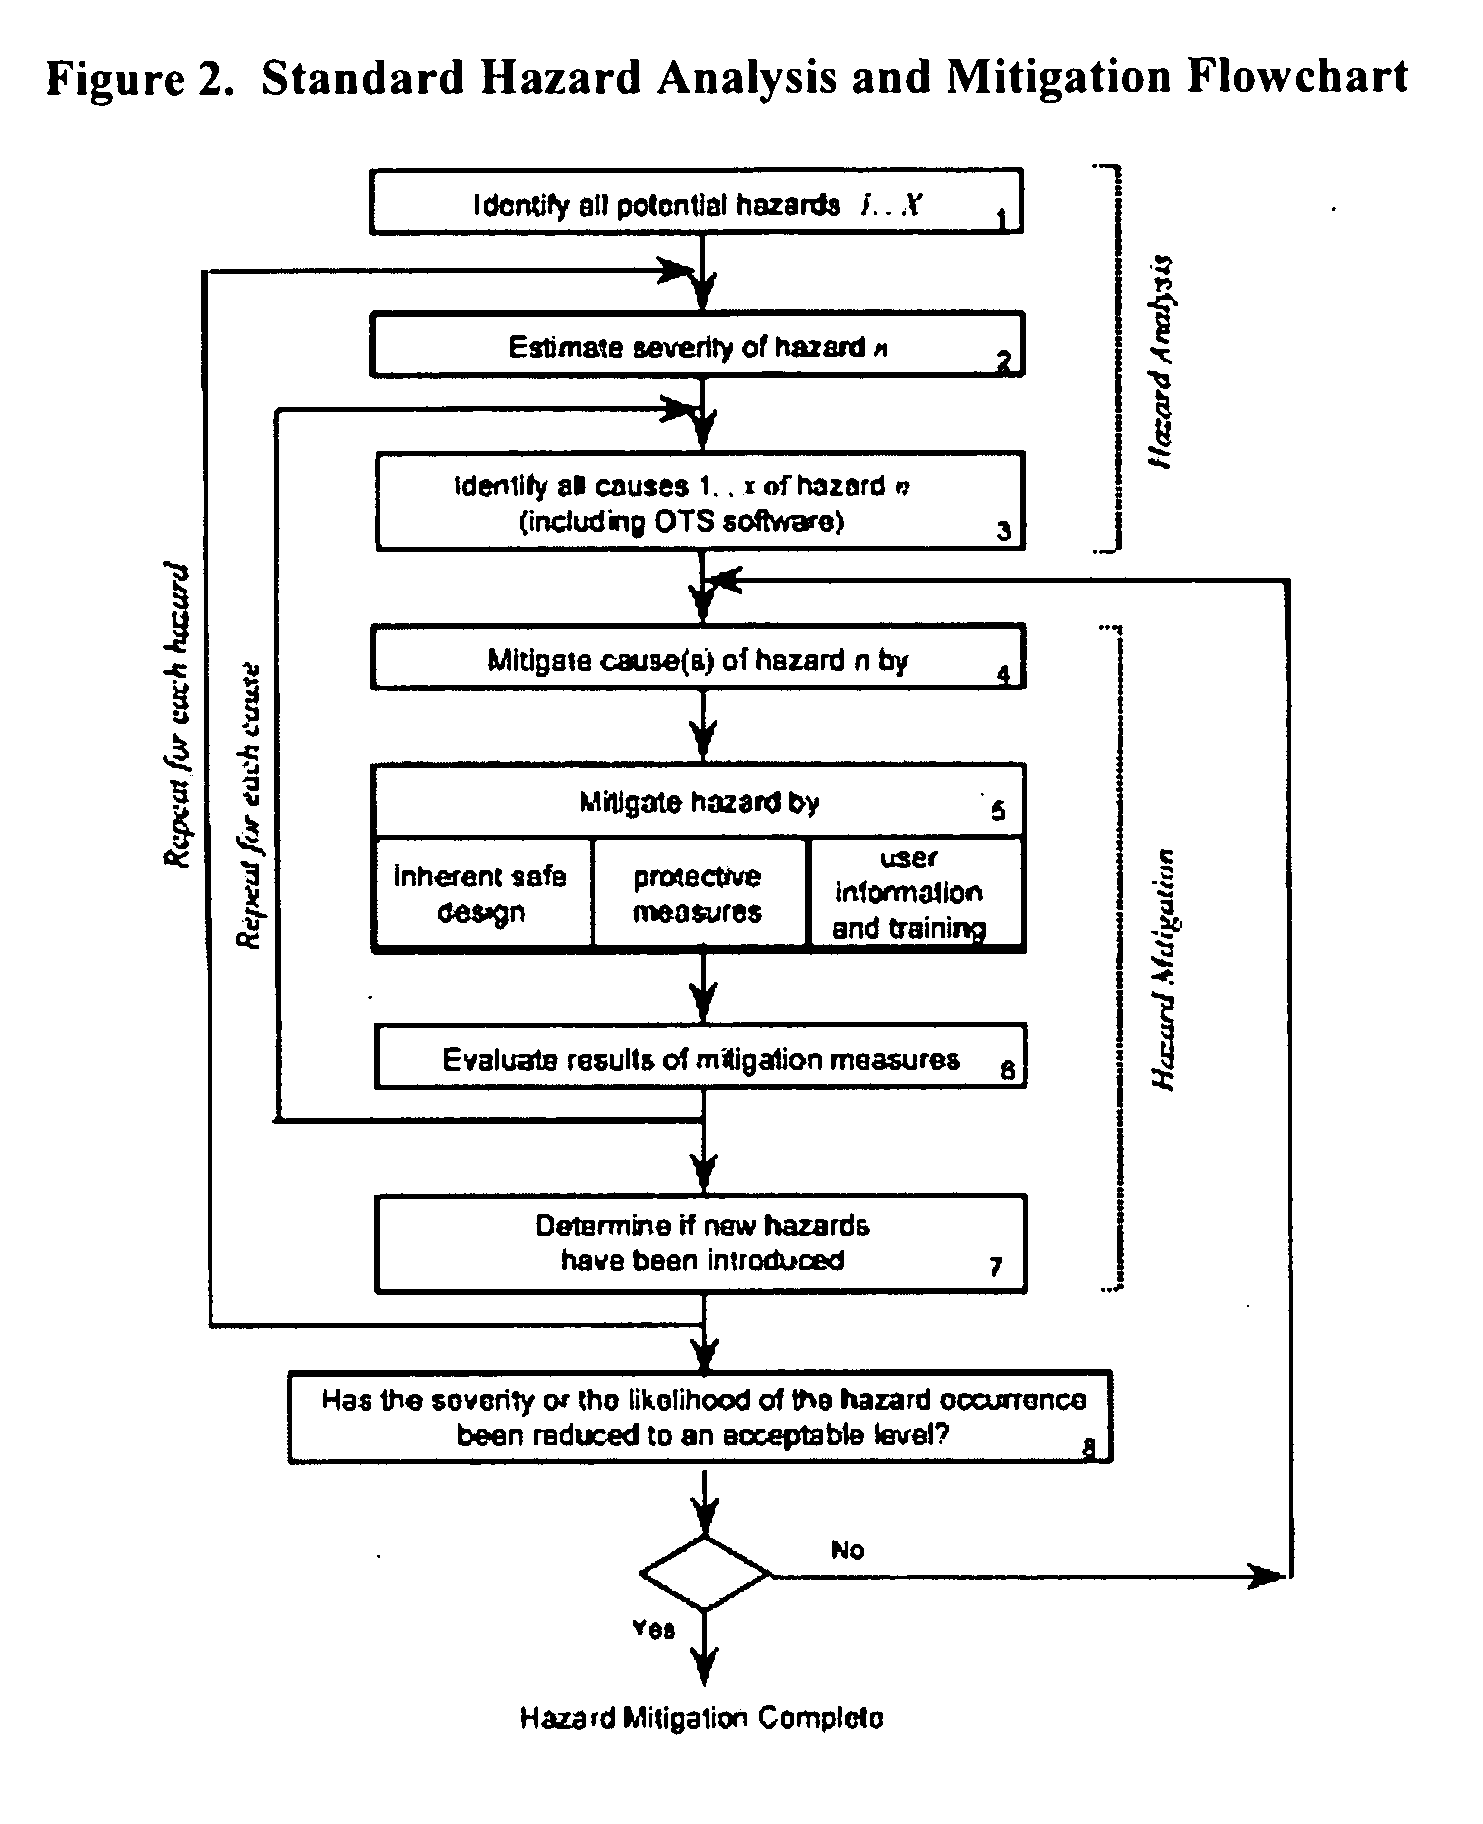 Manufacturing execution system for validation, quality and risk assessment and monitoring of pharamaceutical manufacturing processes